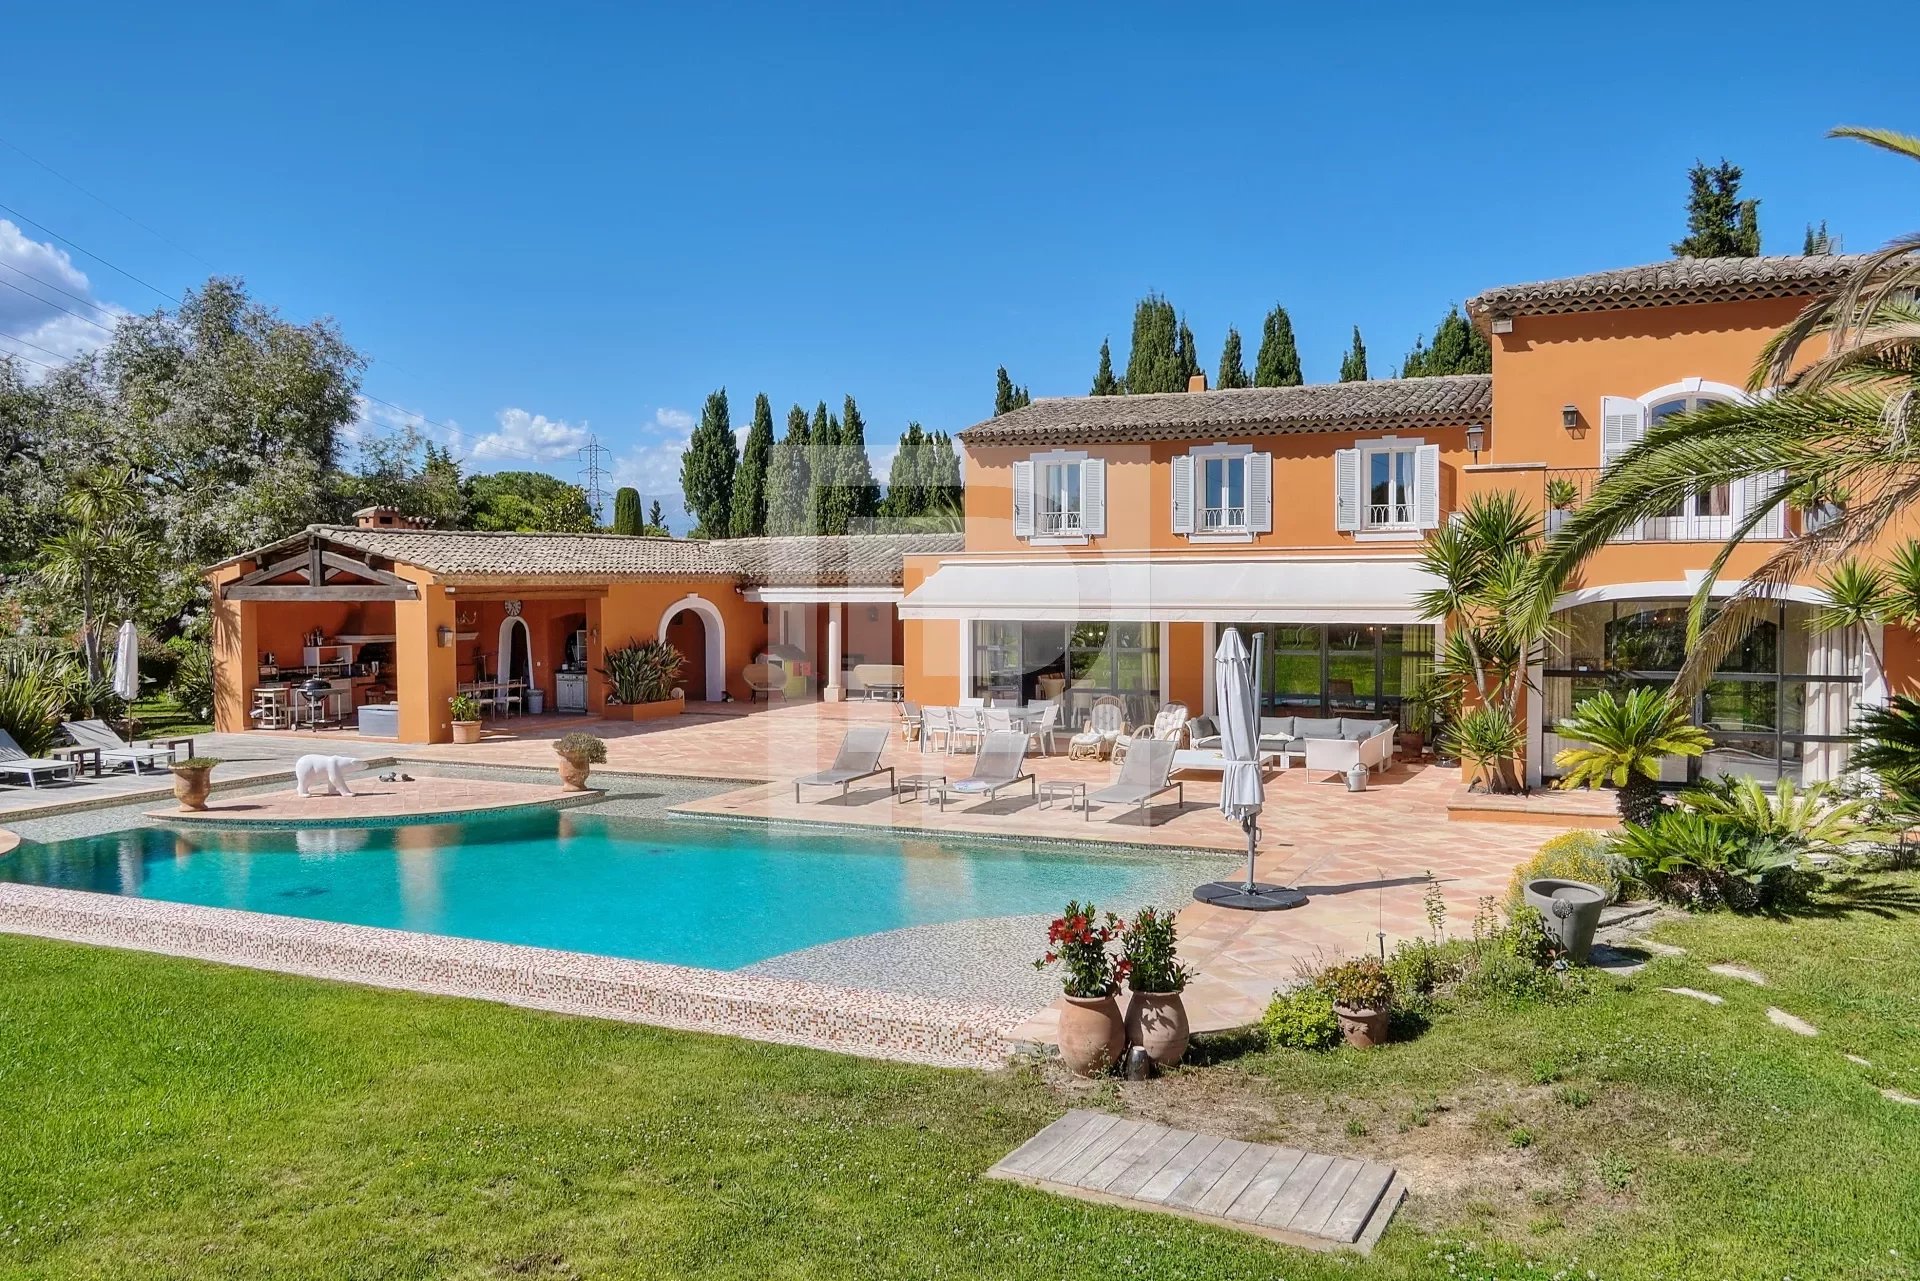 Back on the market - Magnificent property in the heart of one of the most sought-after areas of Mougins